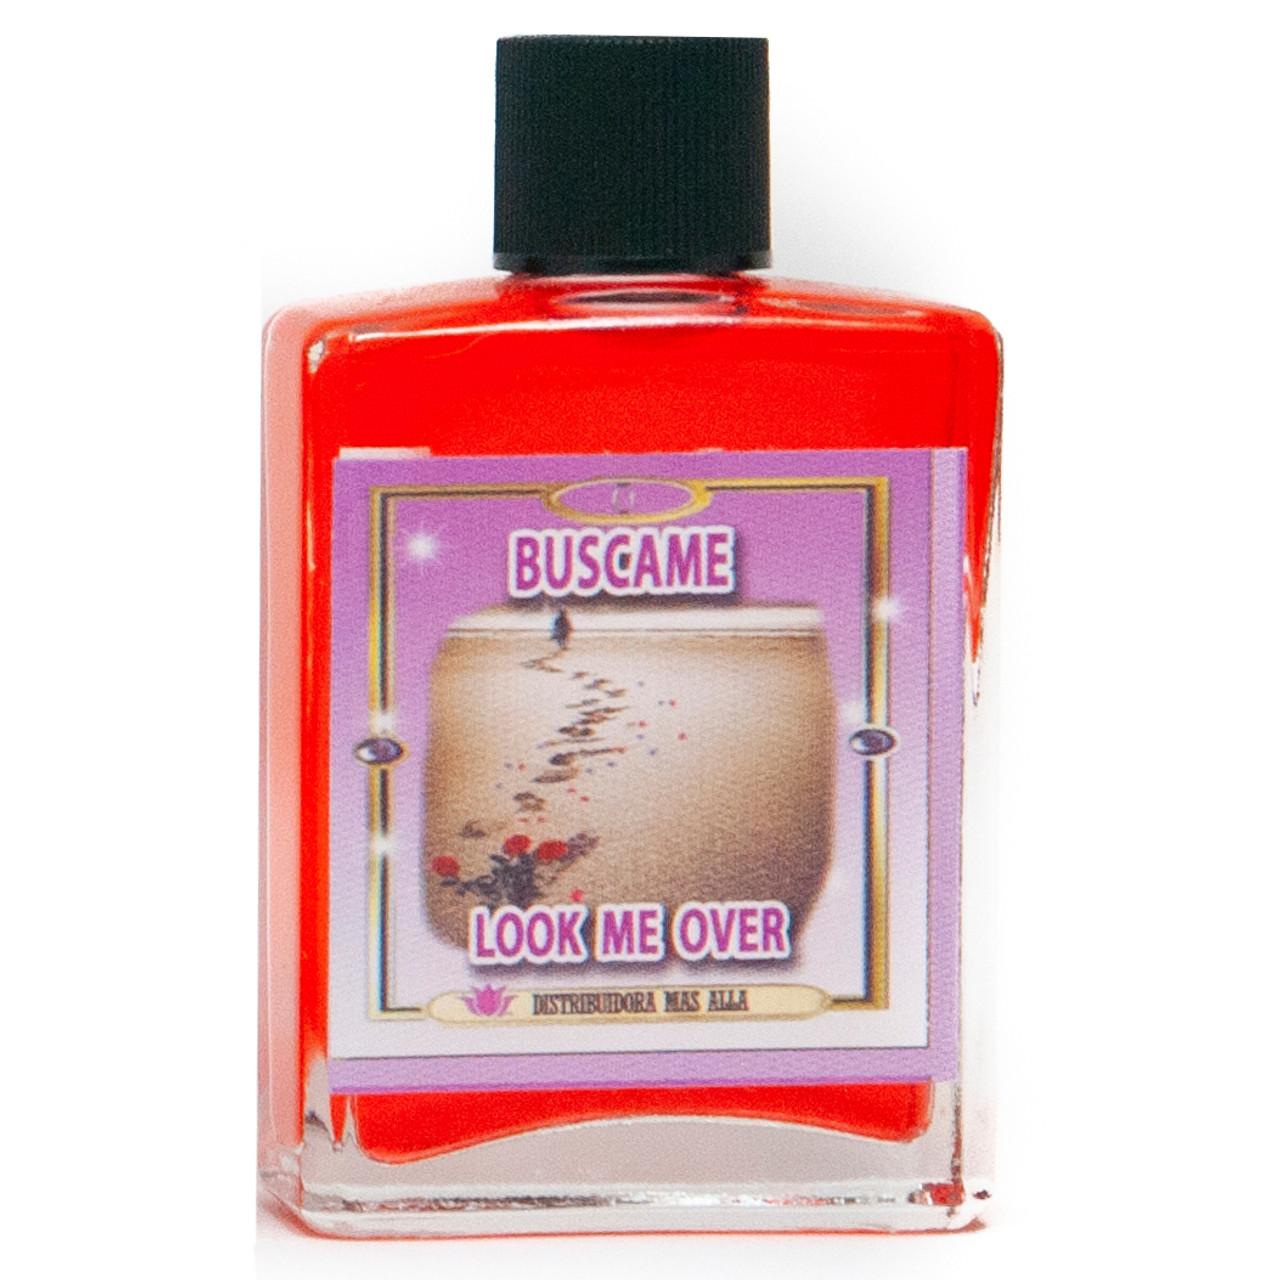 Perfume Buscame - Eseoteric Perfume Look Me Over